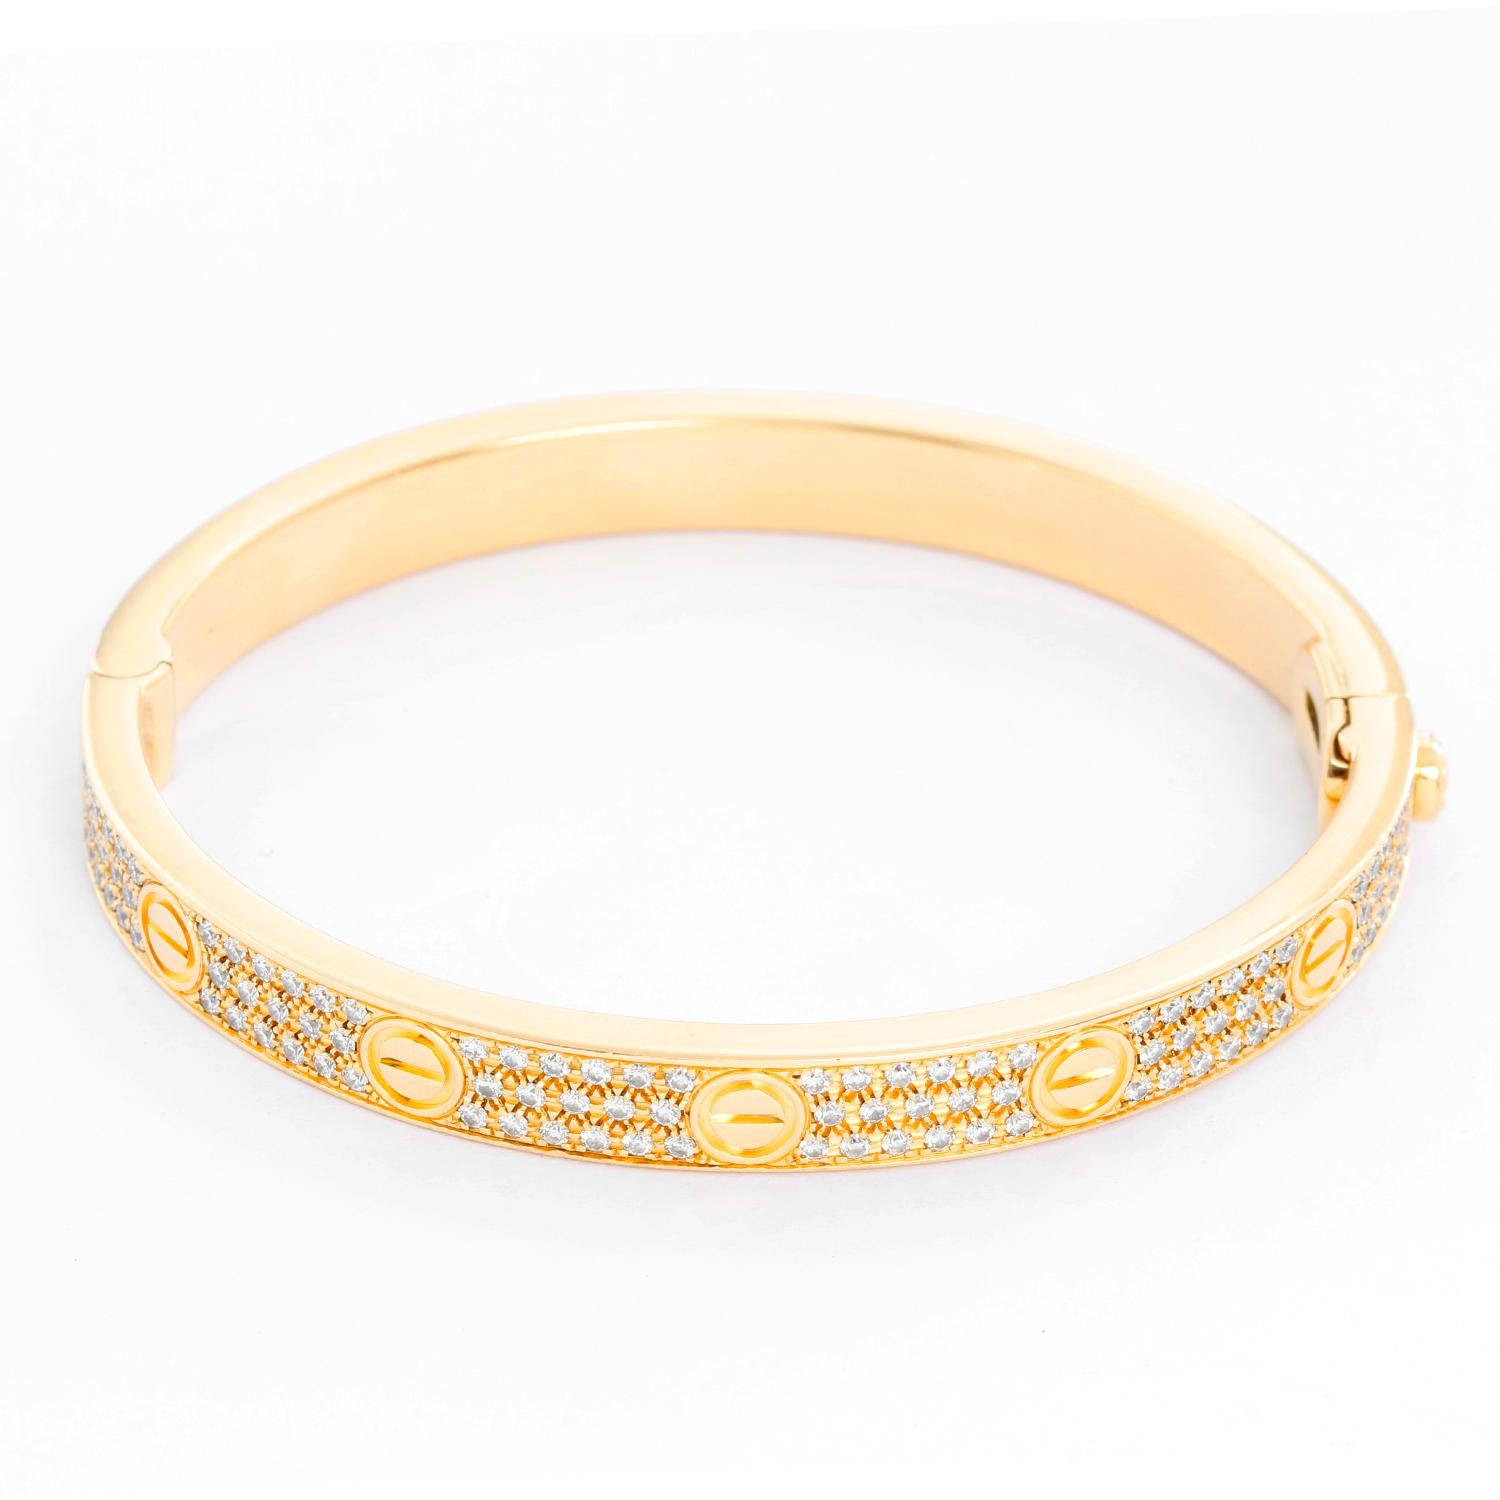 Cartier Love Pave Diamond Yellow Gold Bracelet  - Cartier Love bracelet, 18K yellow gold, set with 204 brilliant-cut diamonds totaling 2 cts. Size 17. Preowned with Cartier box and service papers.